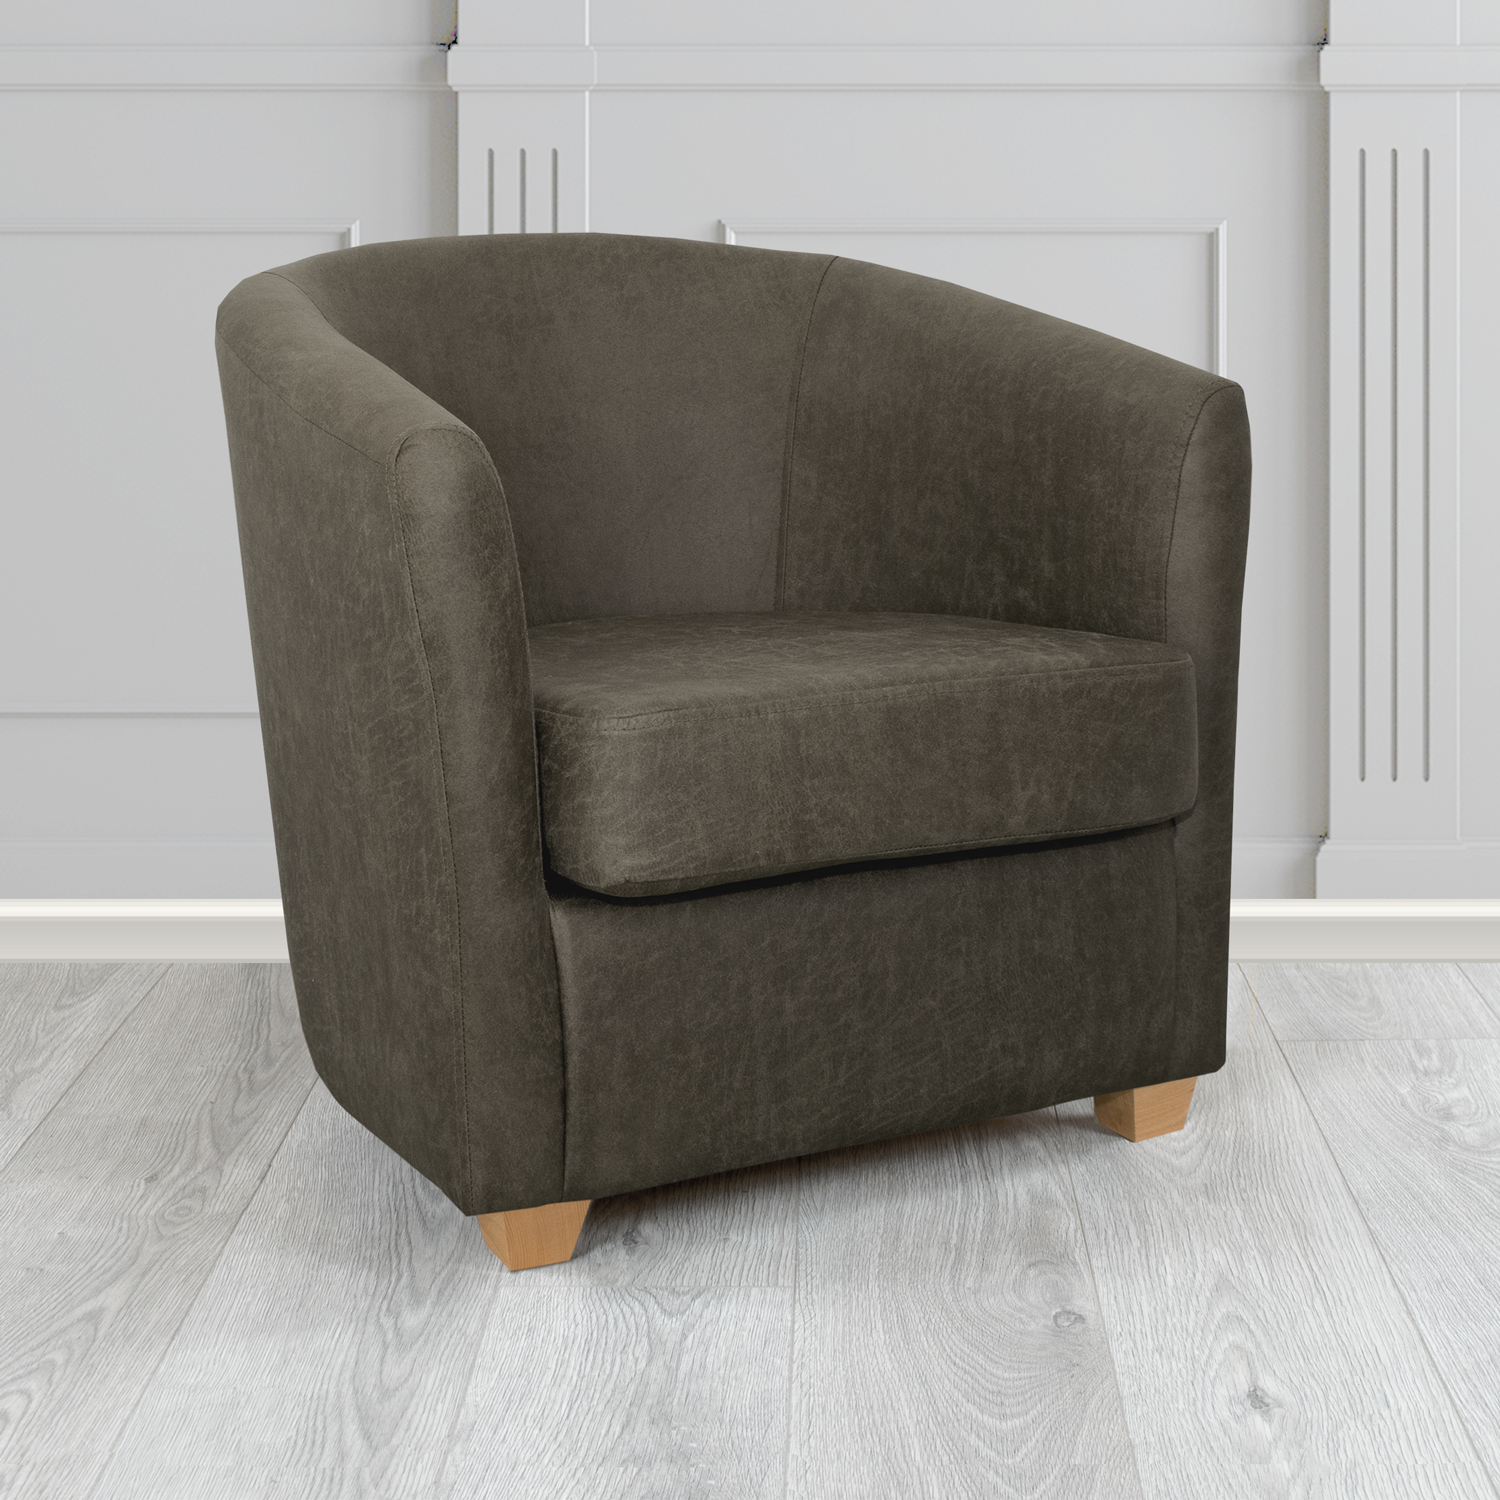 Cannes Tub Chair in Nevada Charcoal Faux Leather - The Tub Chair Shop